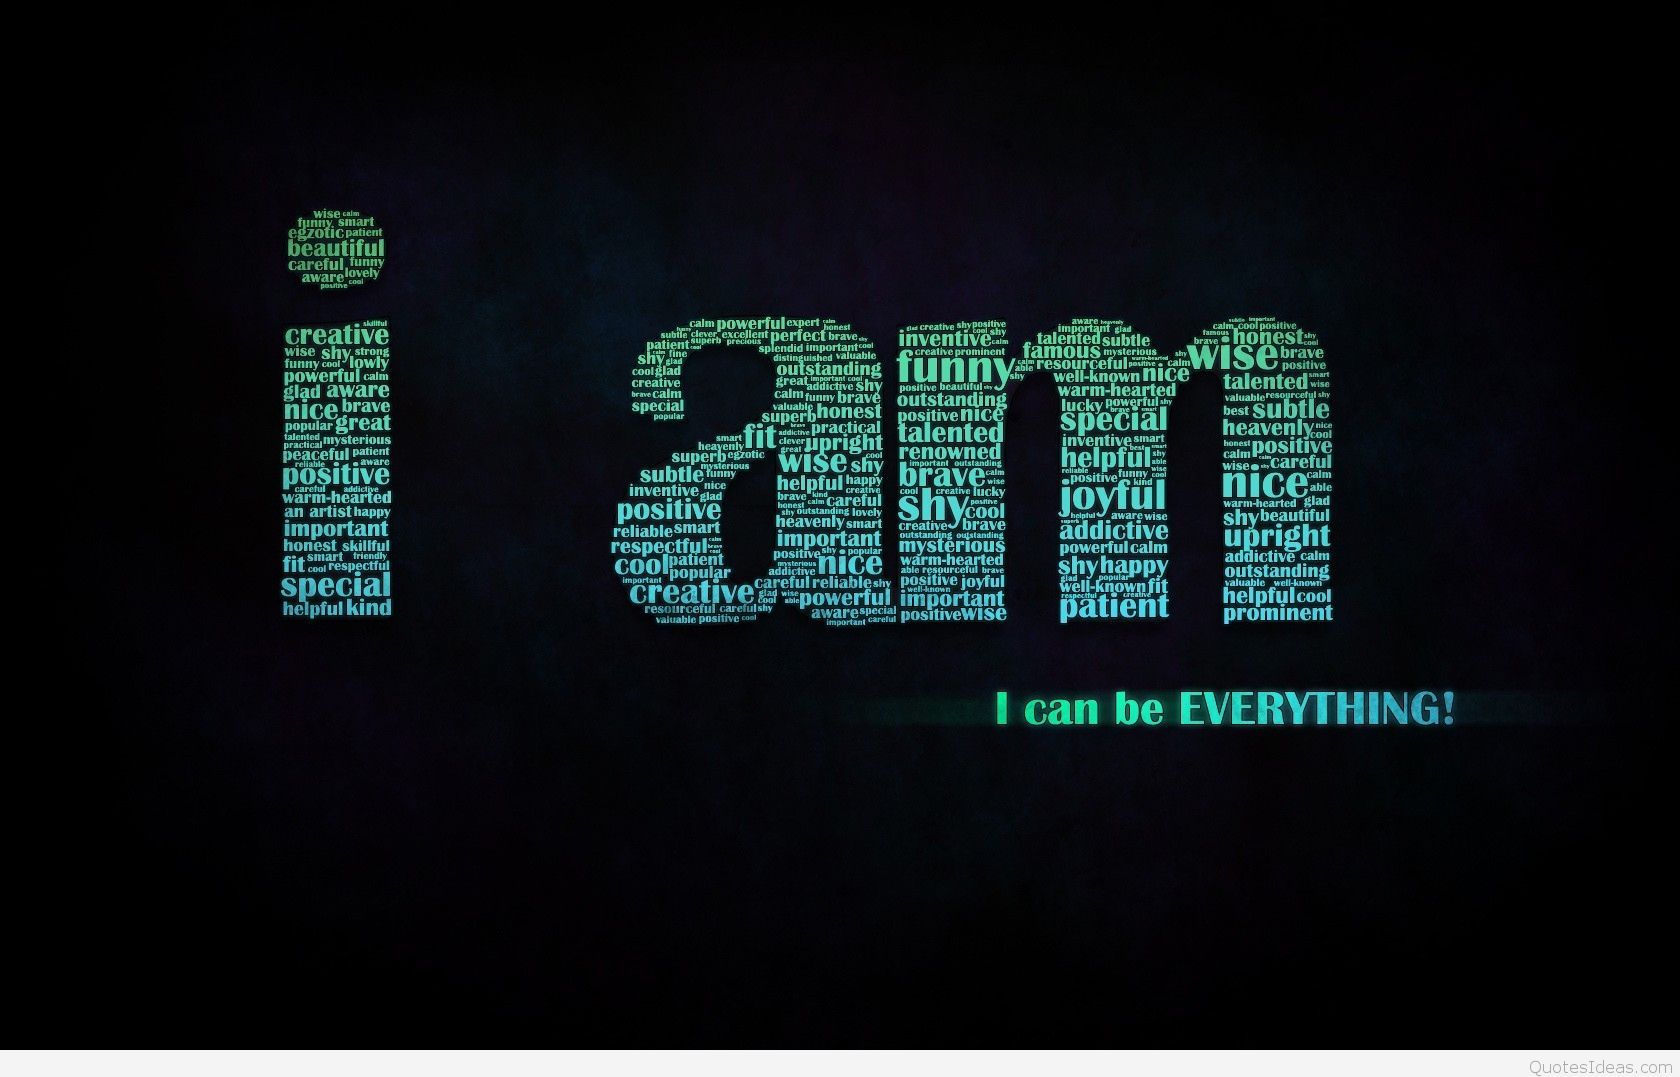 I can be everything quote and wallpaper bodybuilding